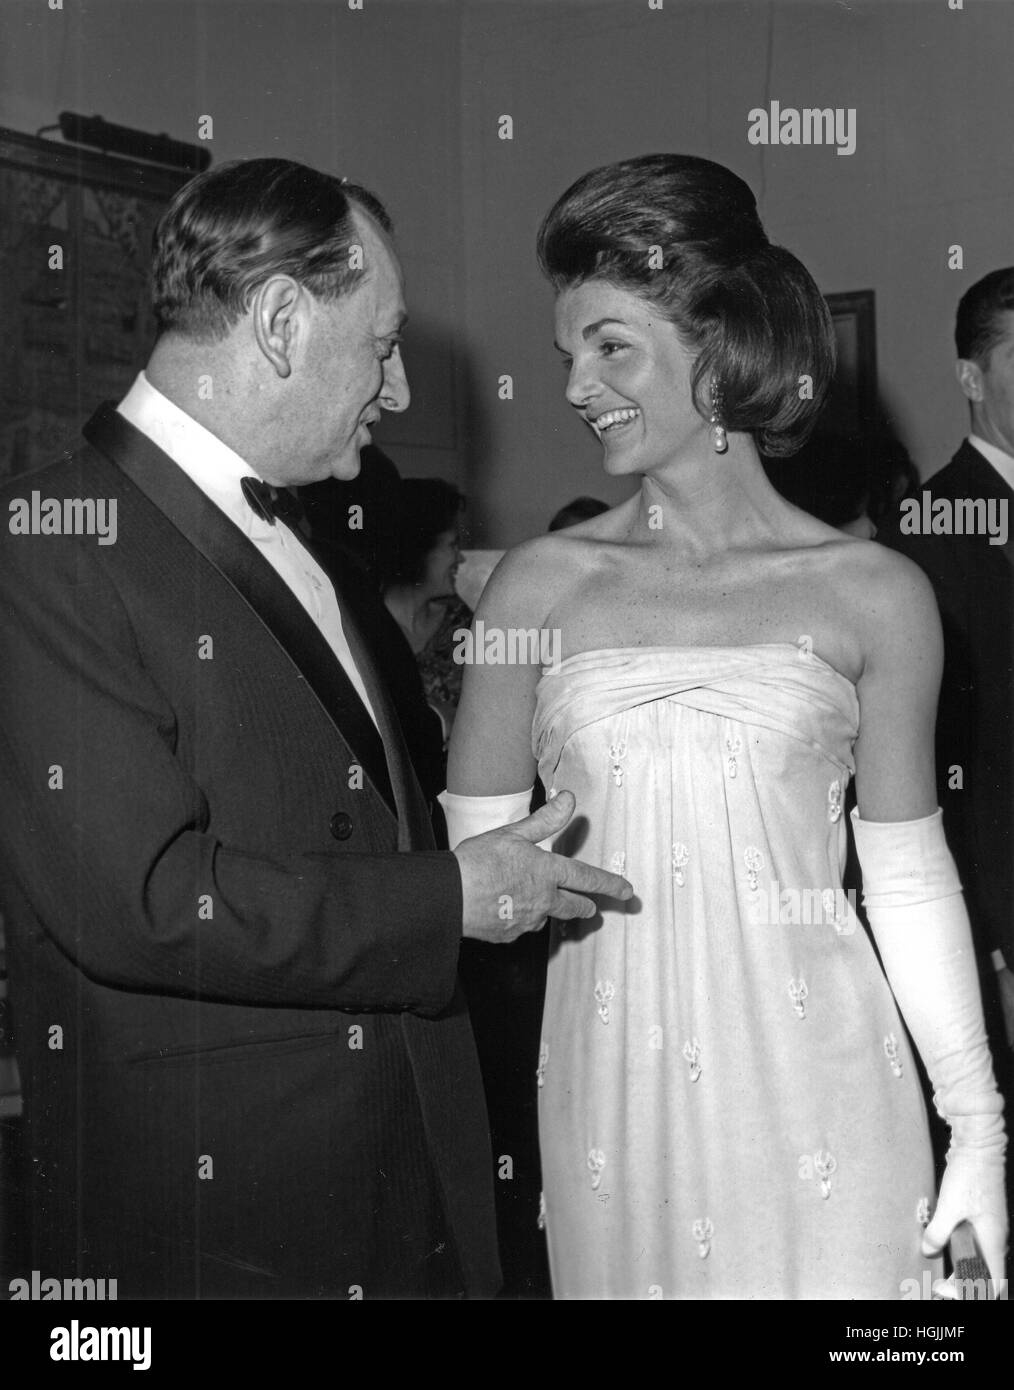 First lady Jacqueline Bouvier Kennedy, left and André Malraux, Minister of Cultural Affairs for France, right, at the opening of the Mona Lisa exhibit at the National Gallery of Art in Washington, DC on January 8, 1963. Credit: Arnie Sachs/CNP - NO WIRE SERVICE - Photo: Arnie Sachs/Consolidated News Photos/Arnie Sachs - CNP Stock Photo